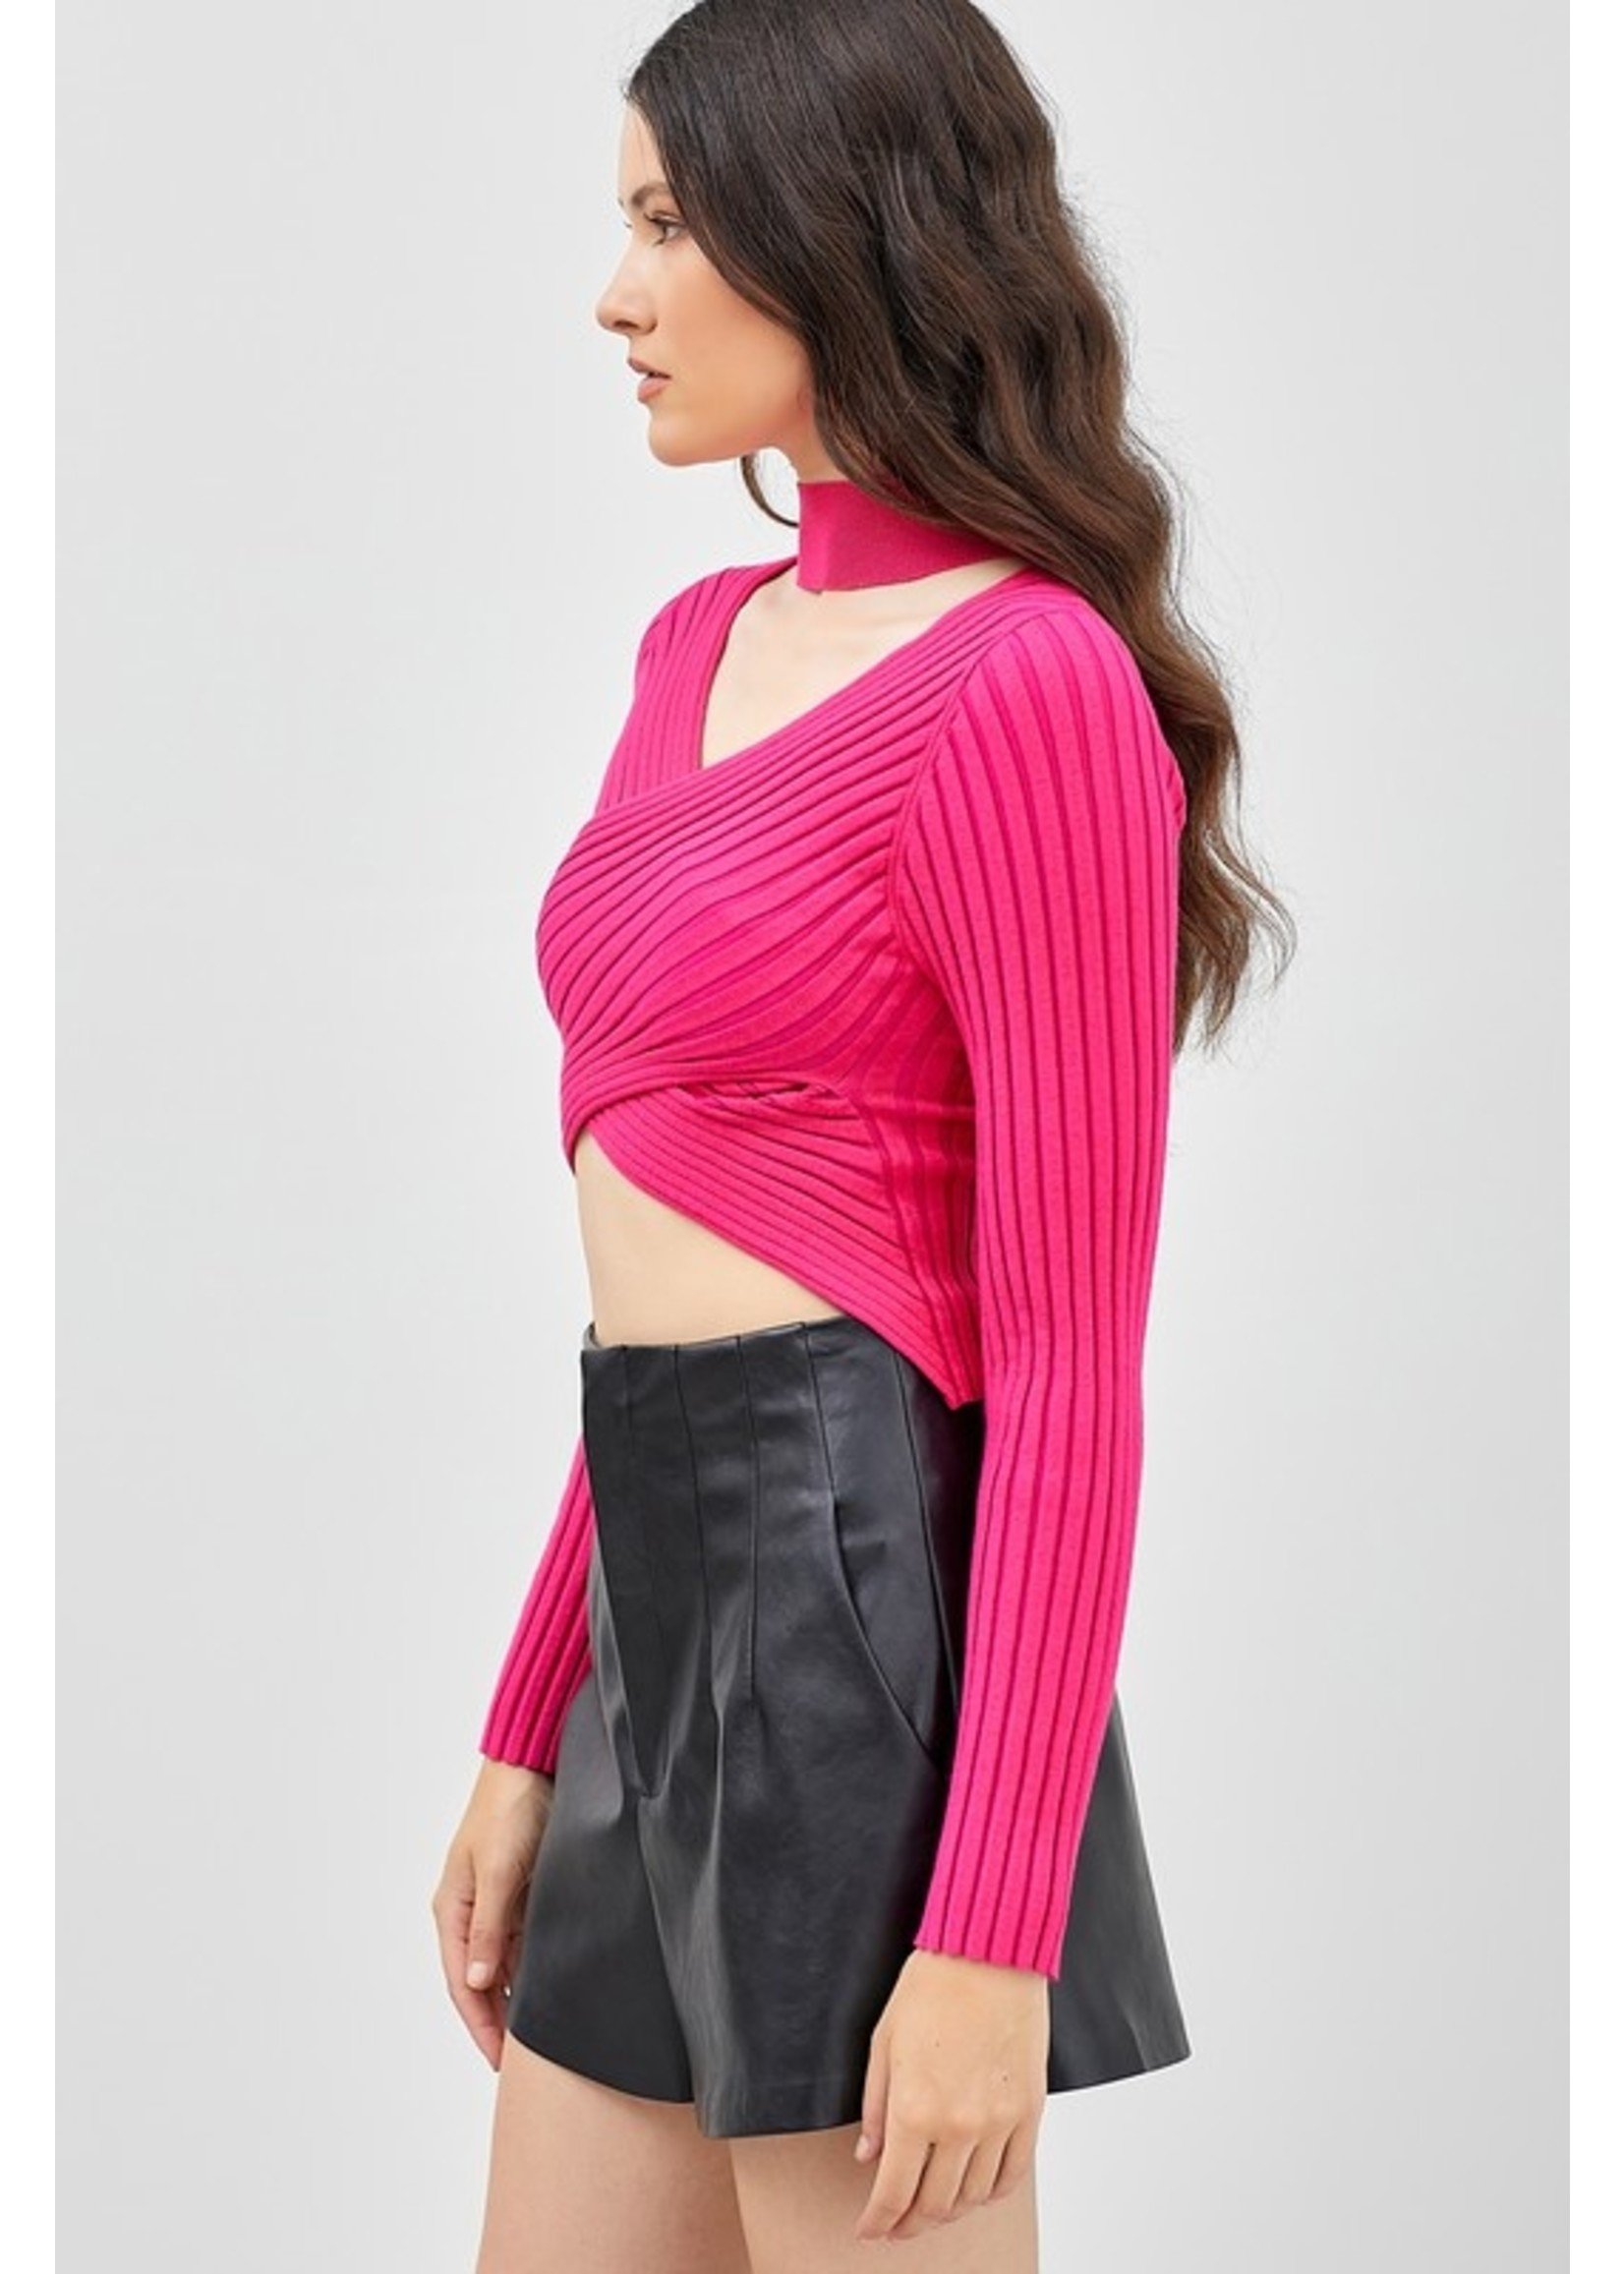 DO + BE Wrap Mock Neck Knit Top - Y22039